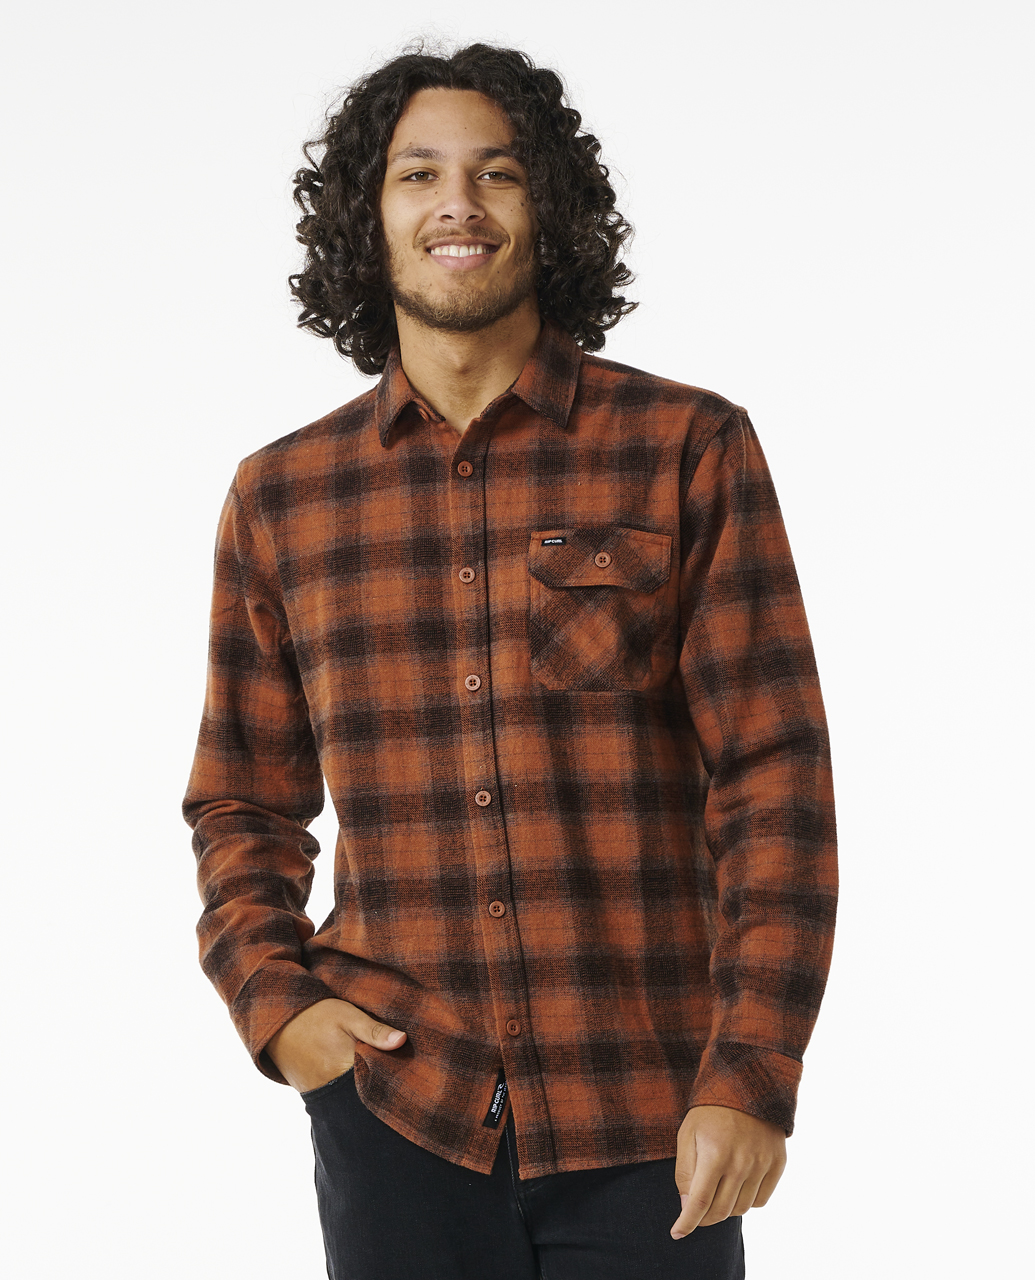 Grinners Flannel